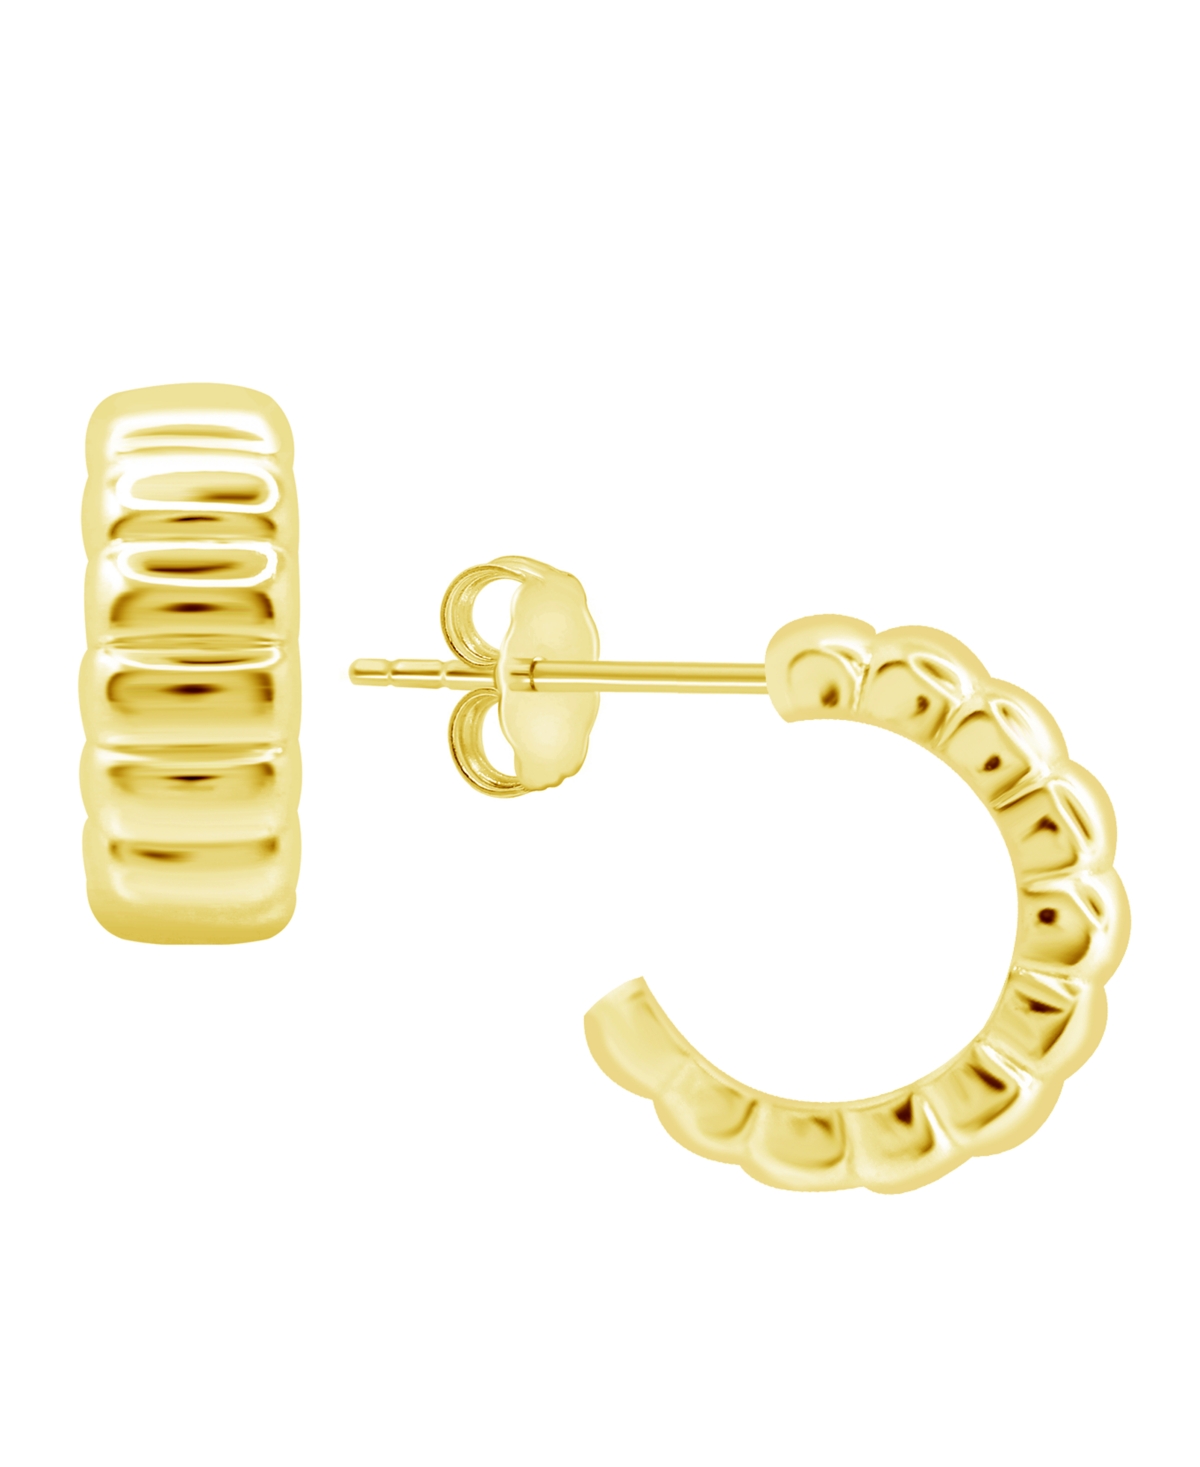 High Polished Puff Ribbed C Hoop Post Earring in Silver Plate or Gold Plate - Gold-Tone